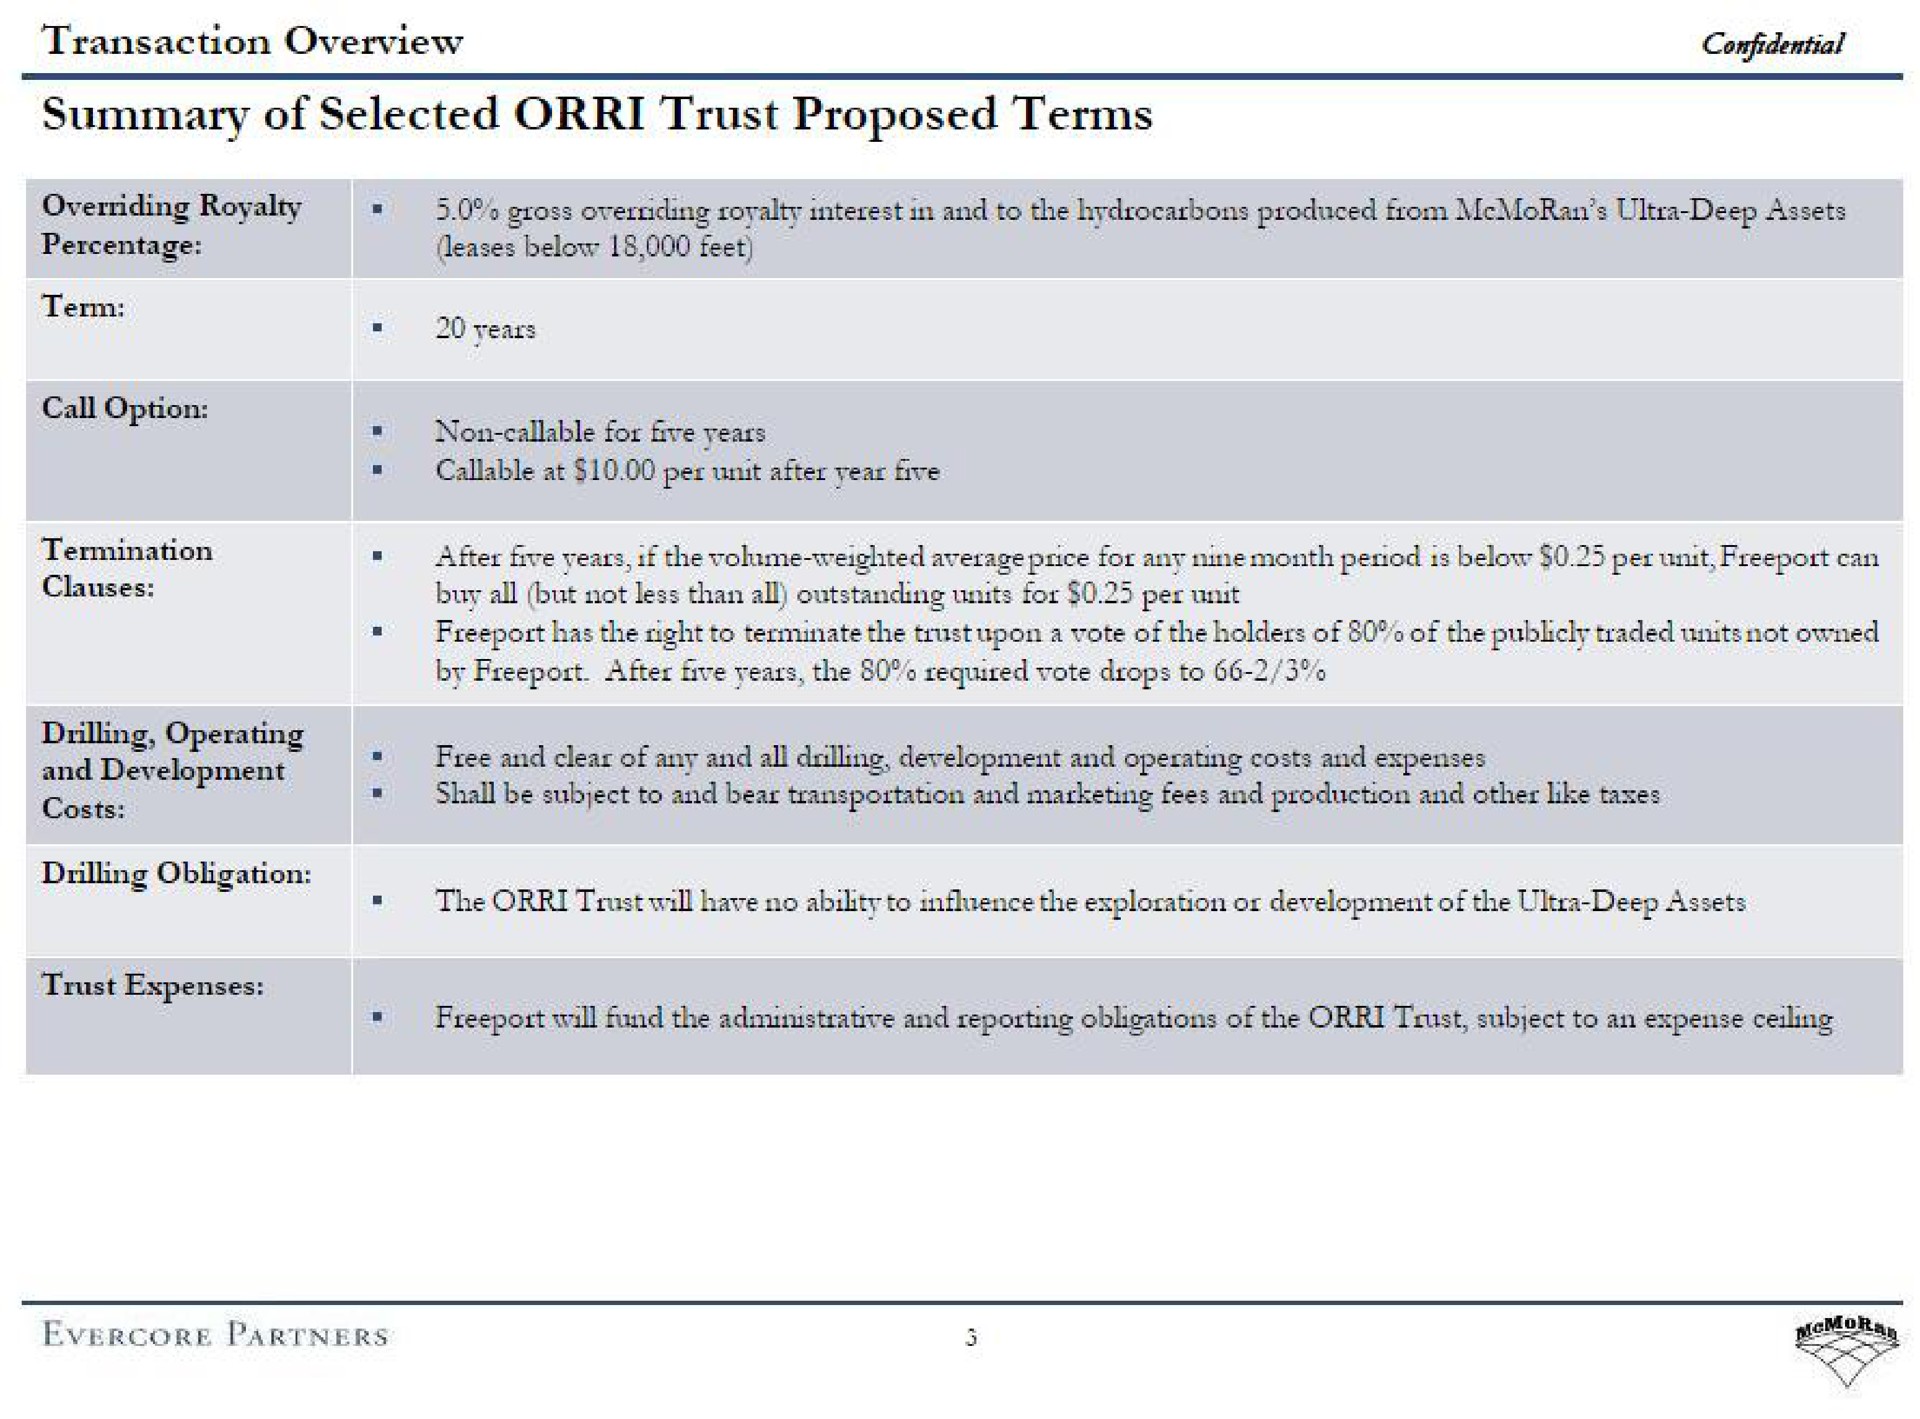 transaction overview summary of selected trust proposed terms confidential | Evercore